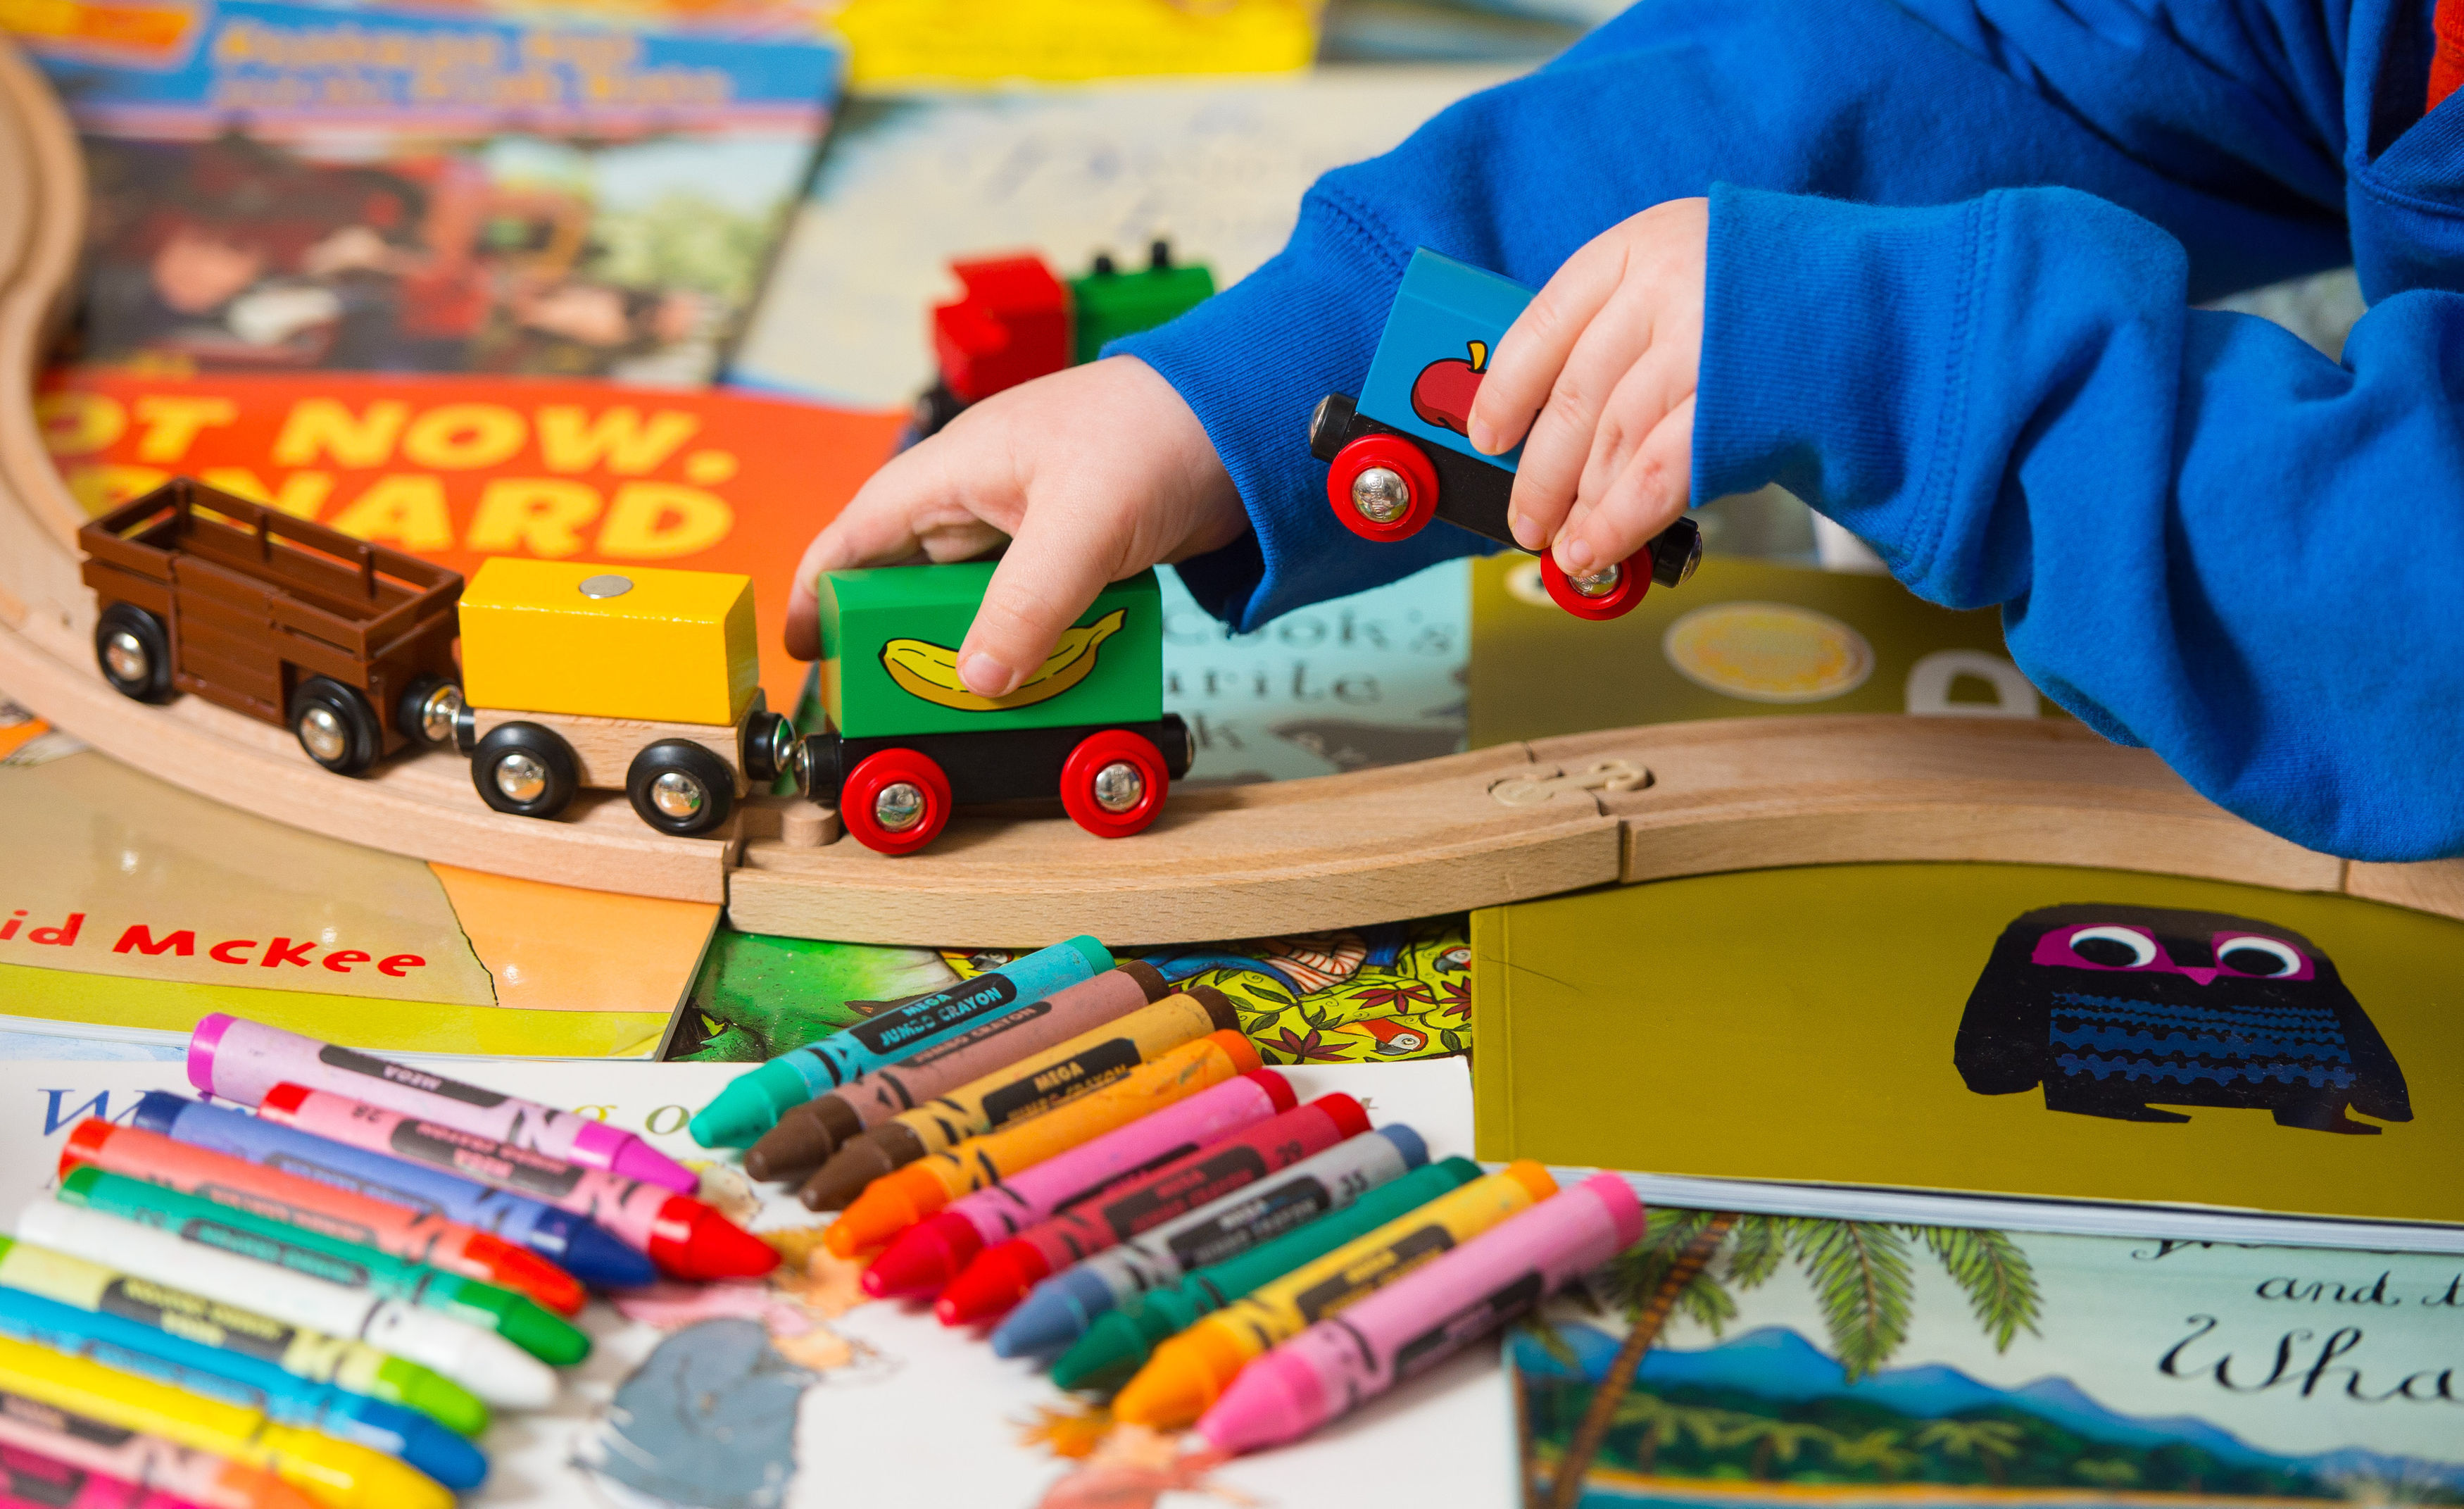 Thousands of nursery workers are being paid below the National Living Wage even though their employers receive Government funding through childcare vouchers and subsidies for parents, a report claims. (Dominic Lipinski/PA Wire)